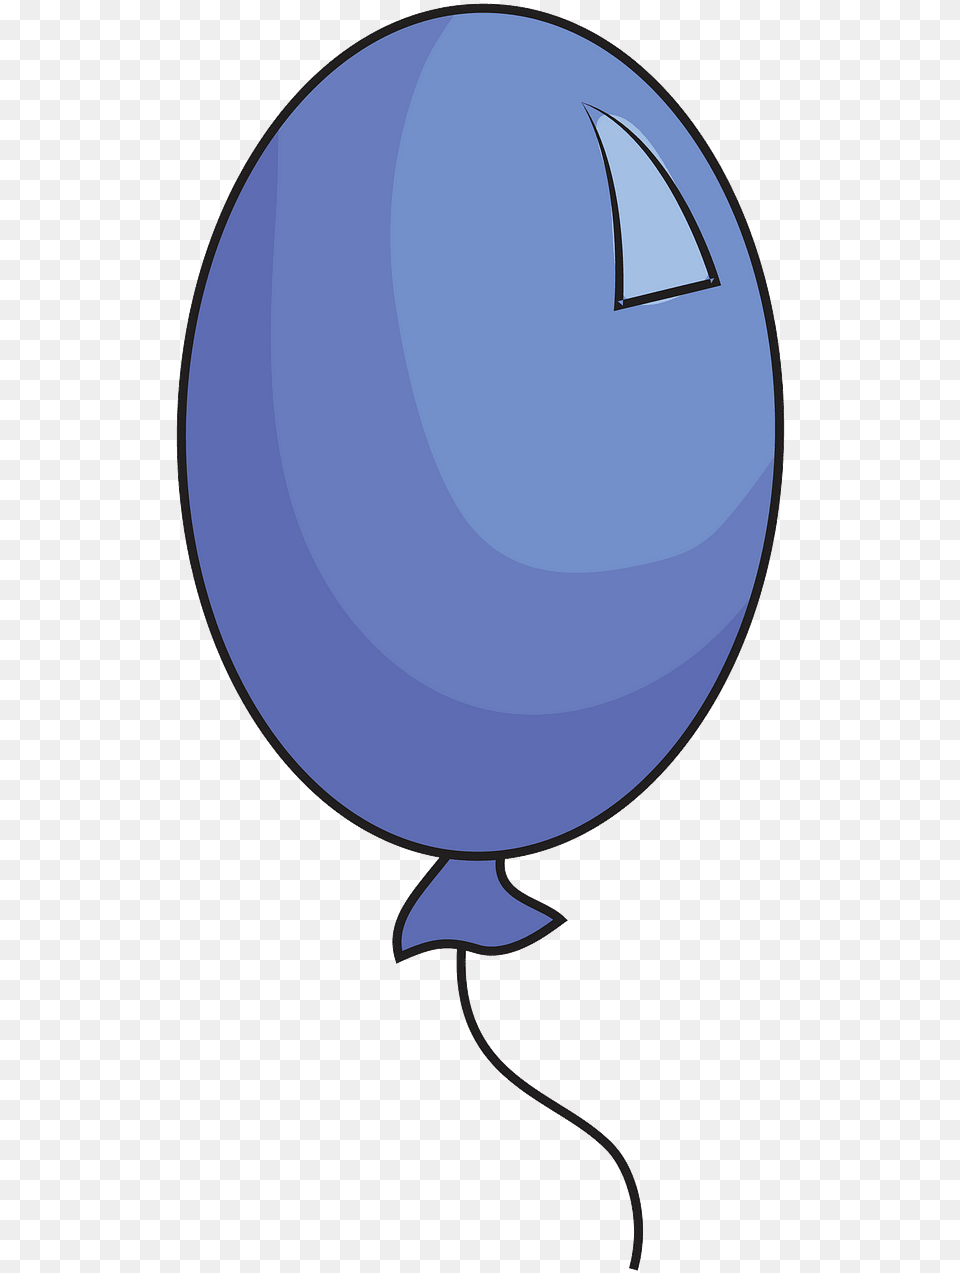 Bauble, Balloon, Sphere Free Transparent Png